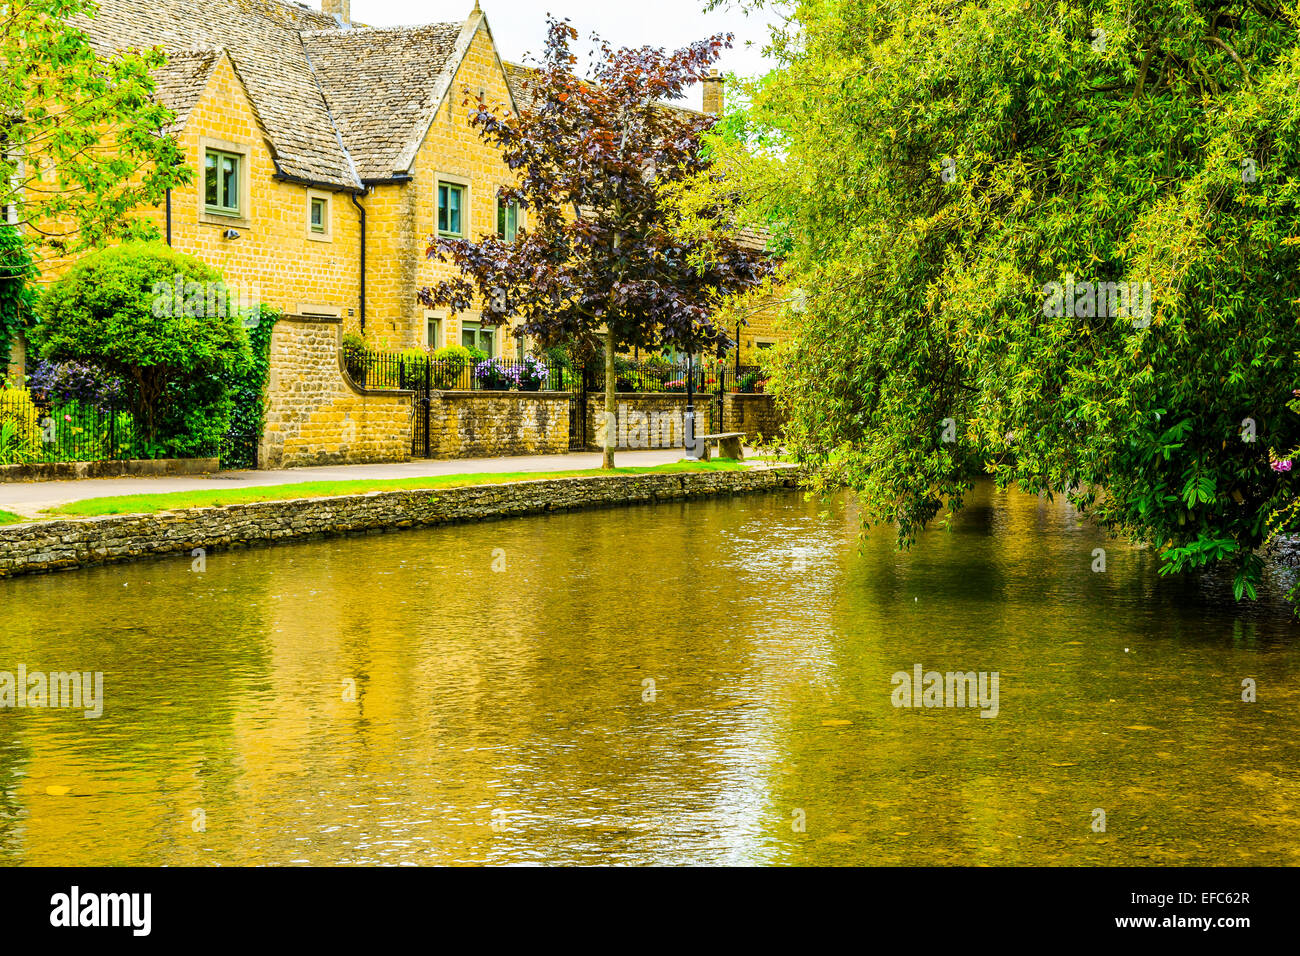 The River Windrush running through Bourton on the Water in The Cotswolds, Gloucestershire, UK. Stock Photo